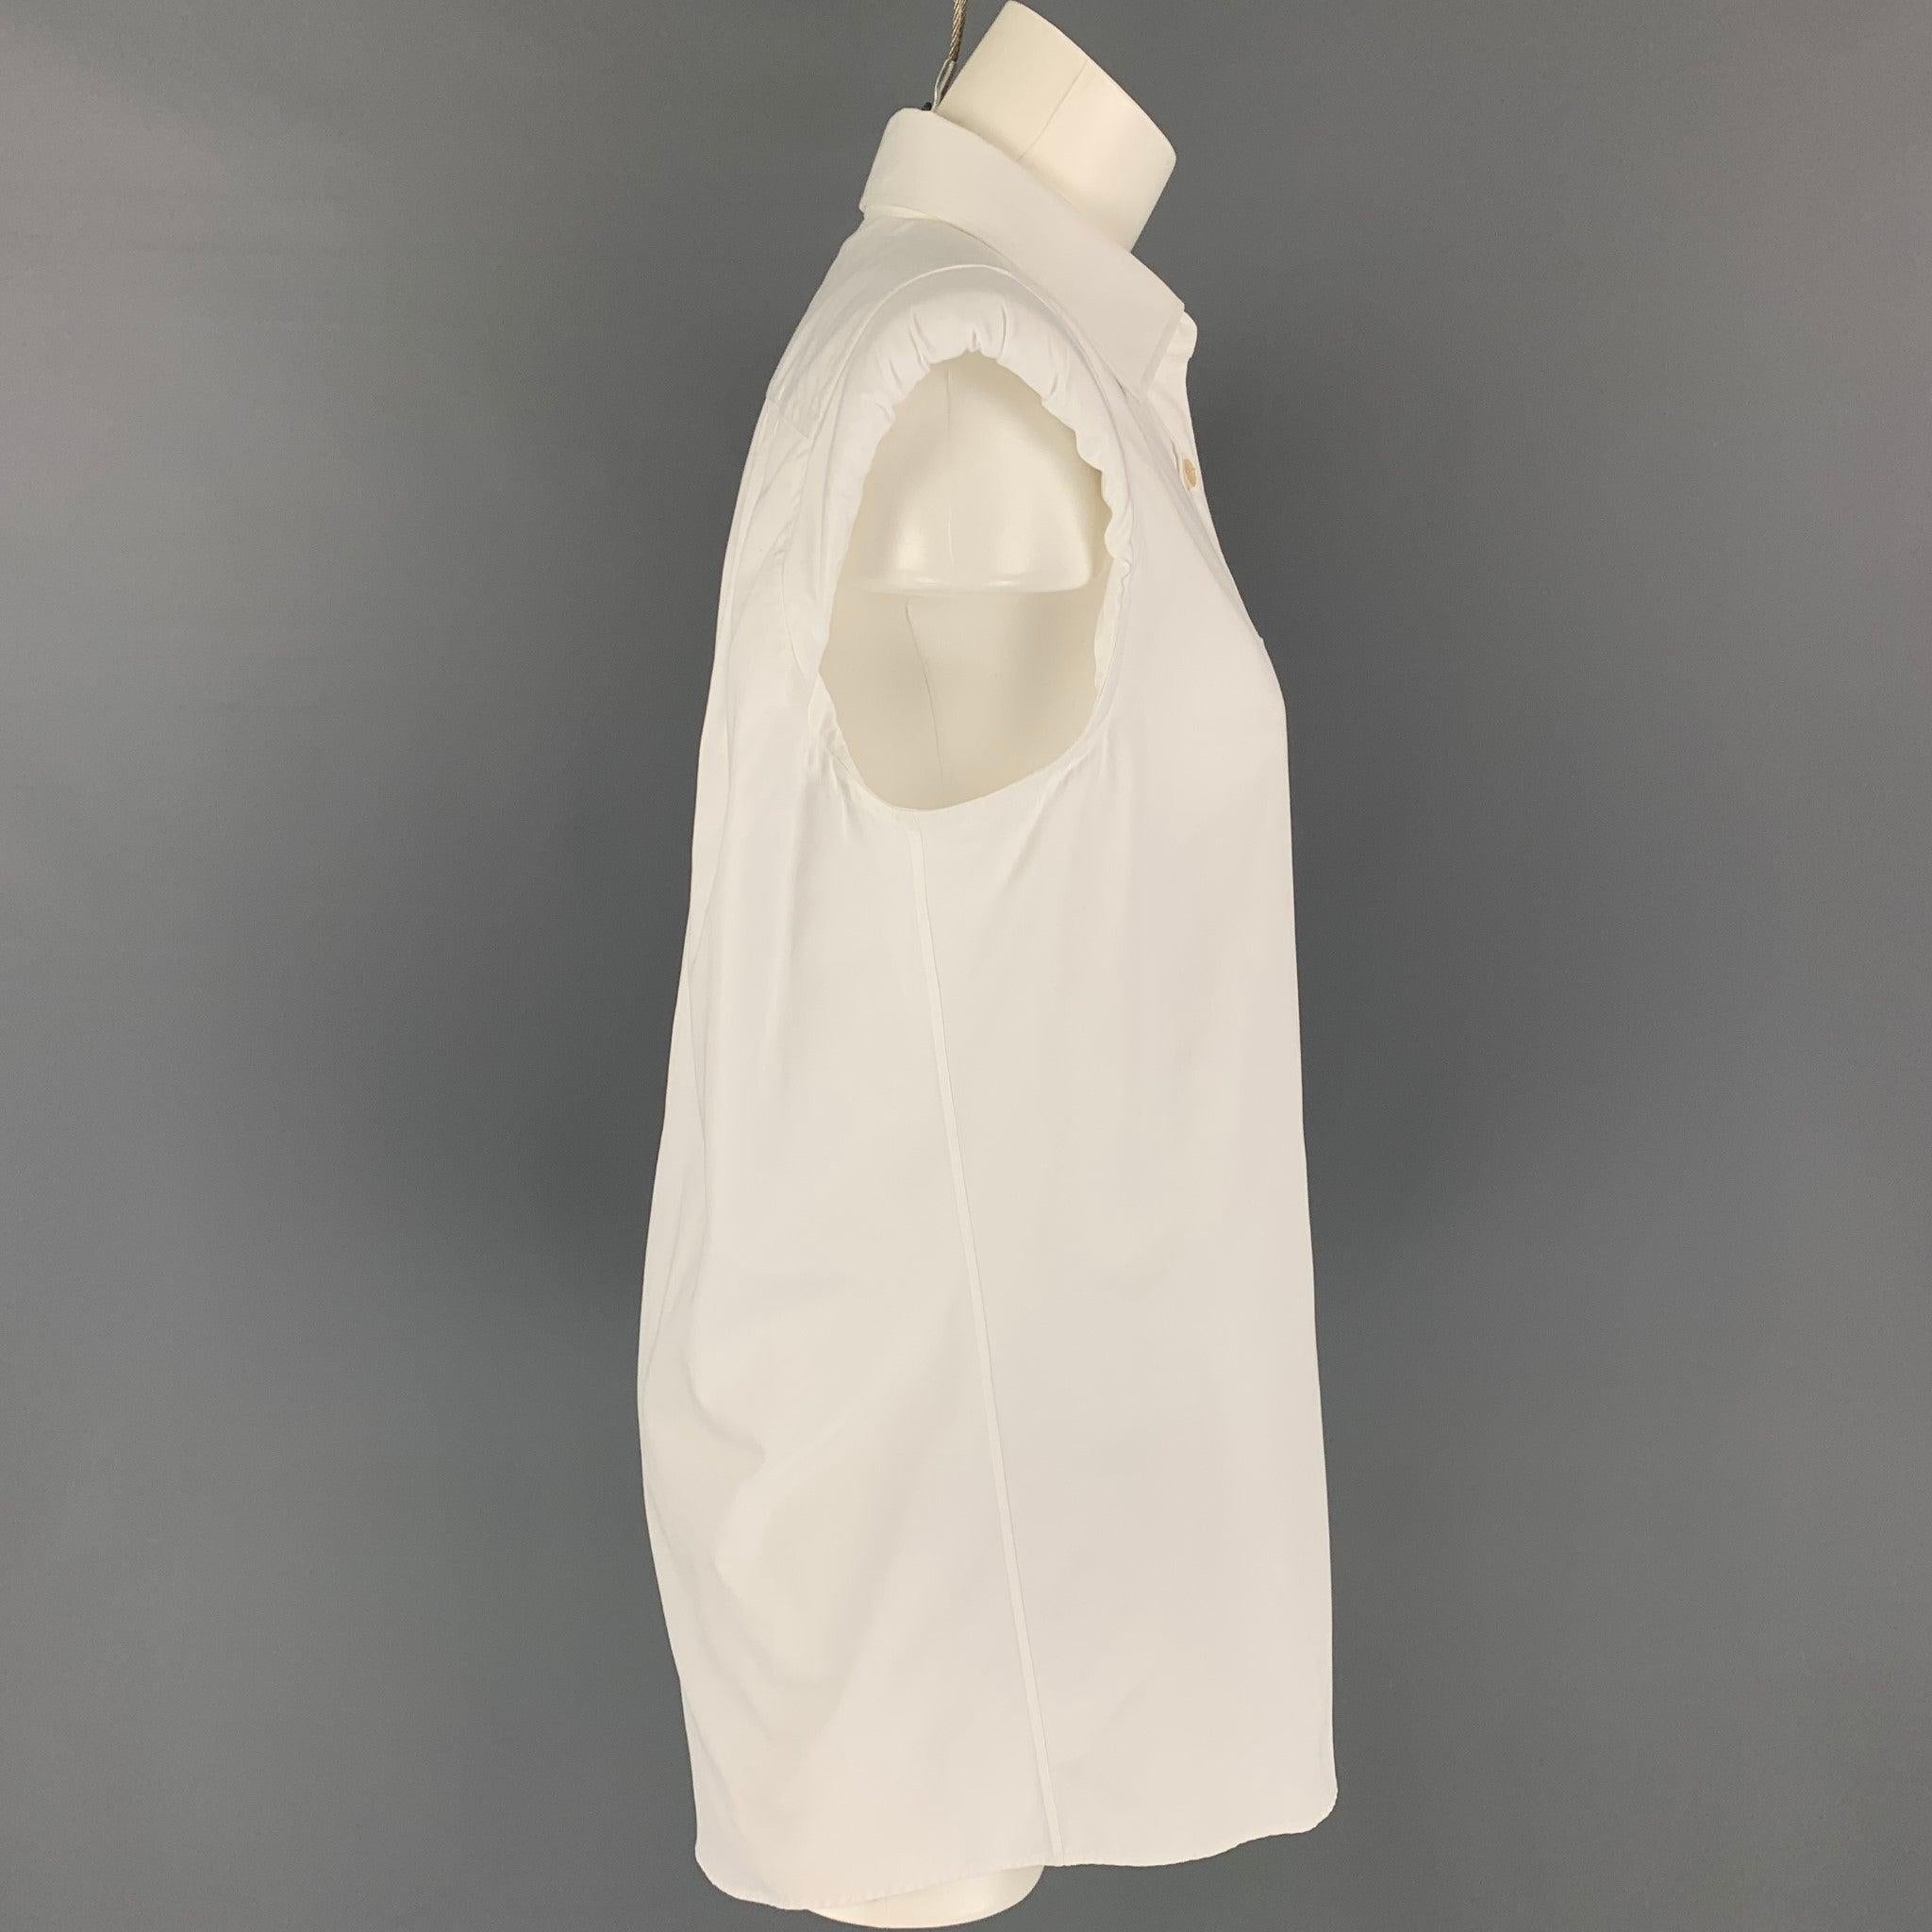 DRIES VAN NOTEN shirt comes in a white cotton featuring a sleeveless style, shoulder pads, front pocket, and a buttoned closure.
Very Good
Pre-Owned Condition. 

Marked:   38 

Measurements: 
 
Shoulder:
16 inches  Bust: 38 inches  Length: 31.5